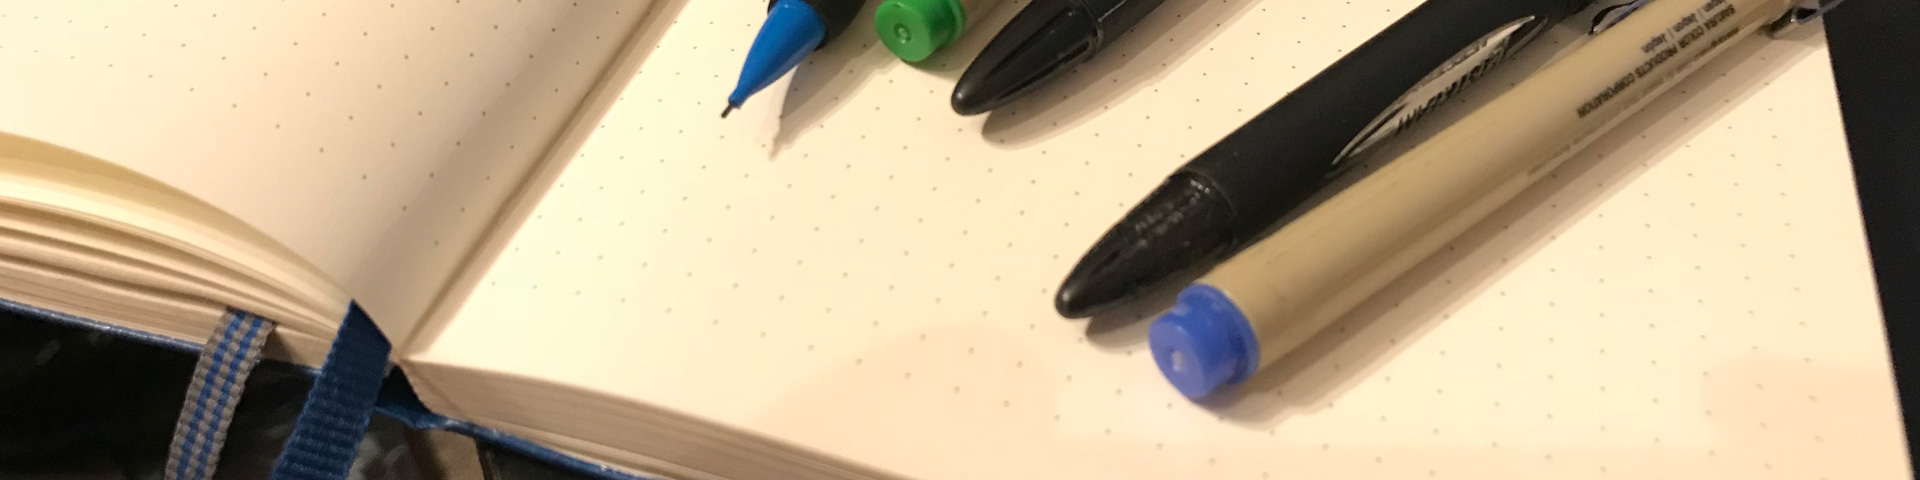 Pens and pencils atop a writing journal.